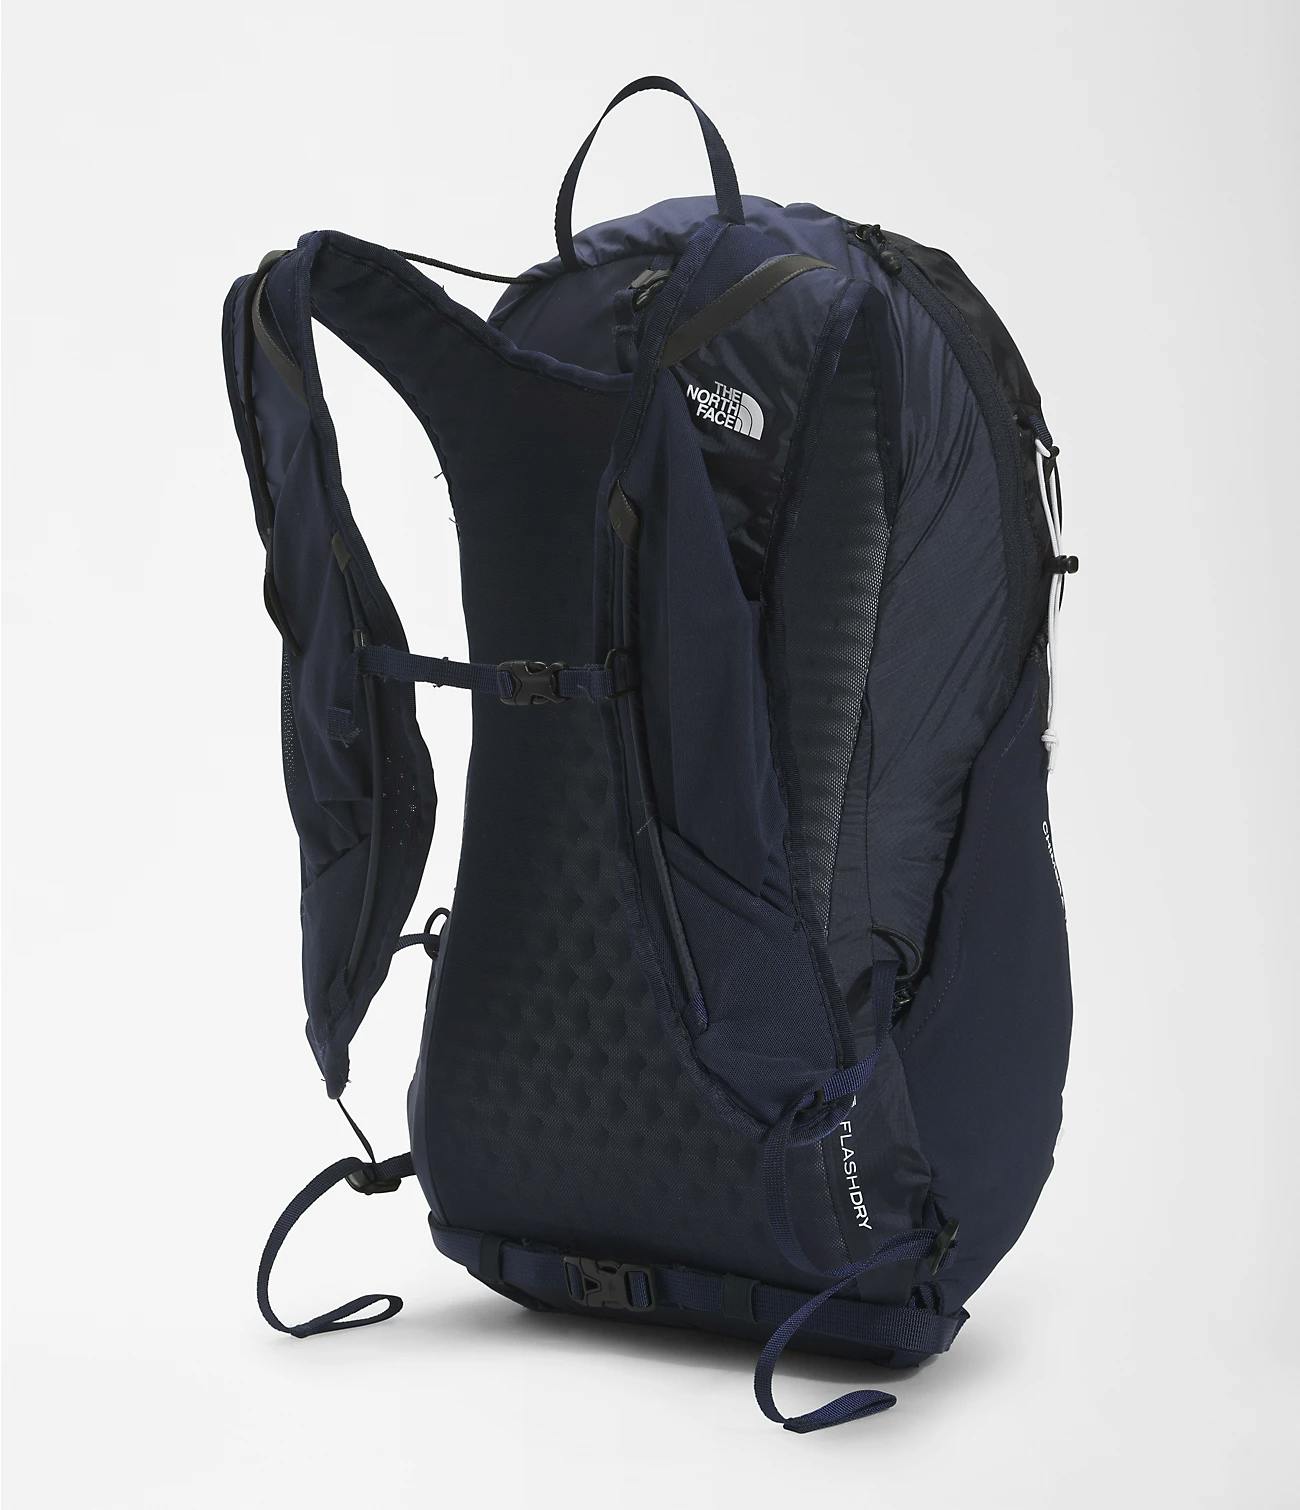 The North Face Chimera 18L Backpack · Black / Aviator Navy